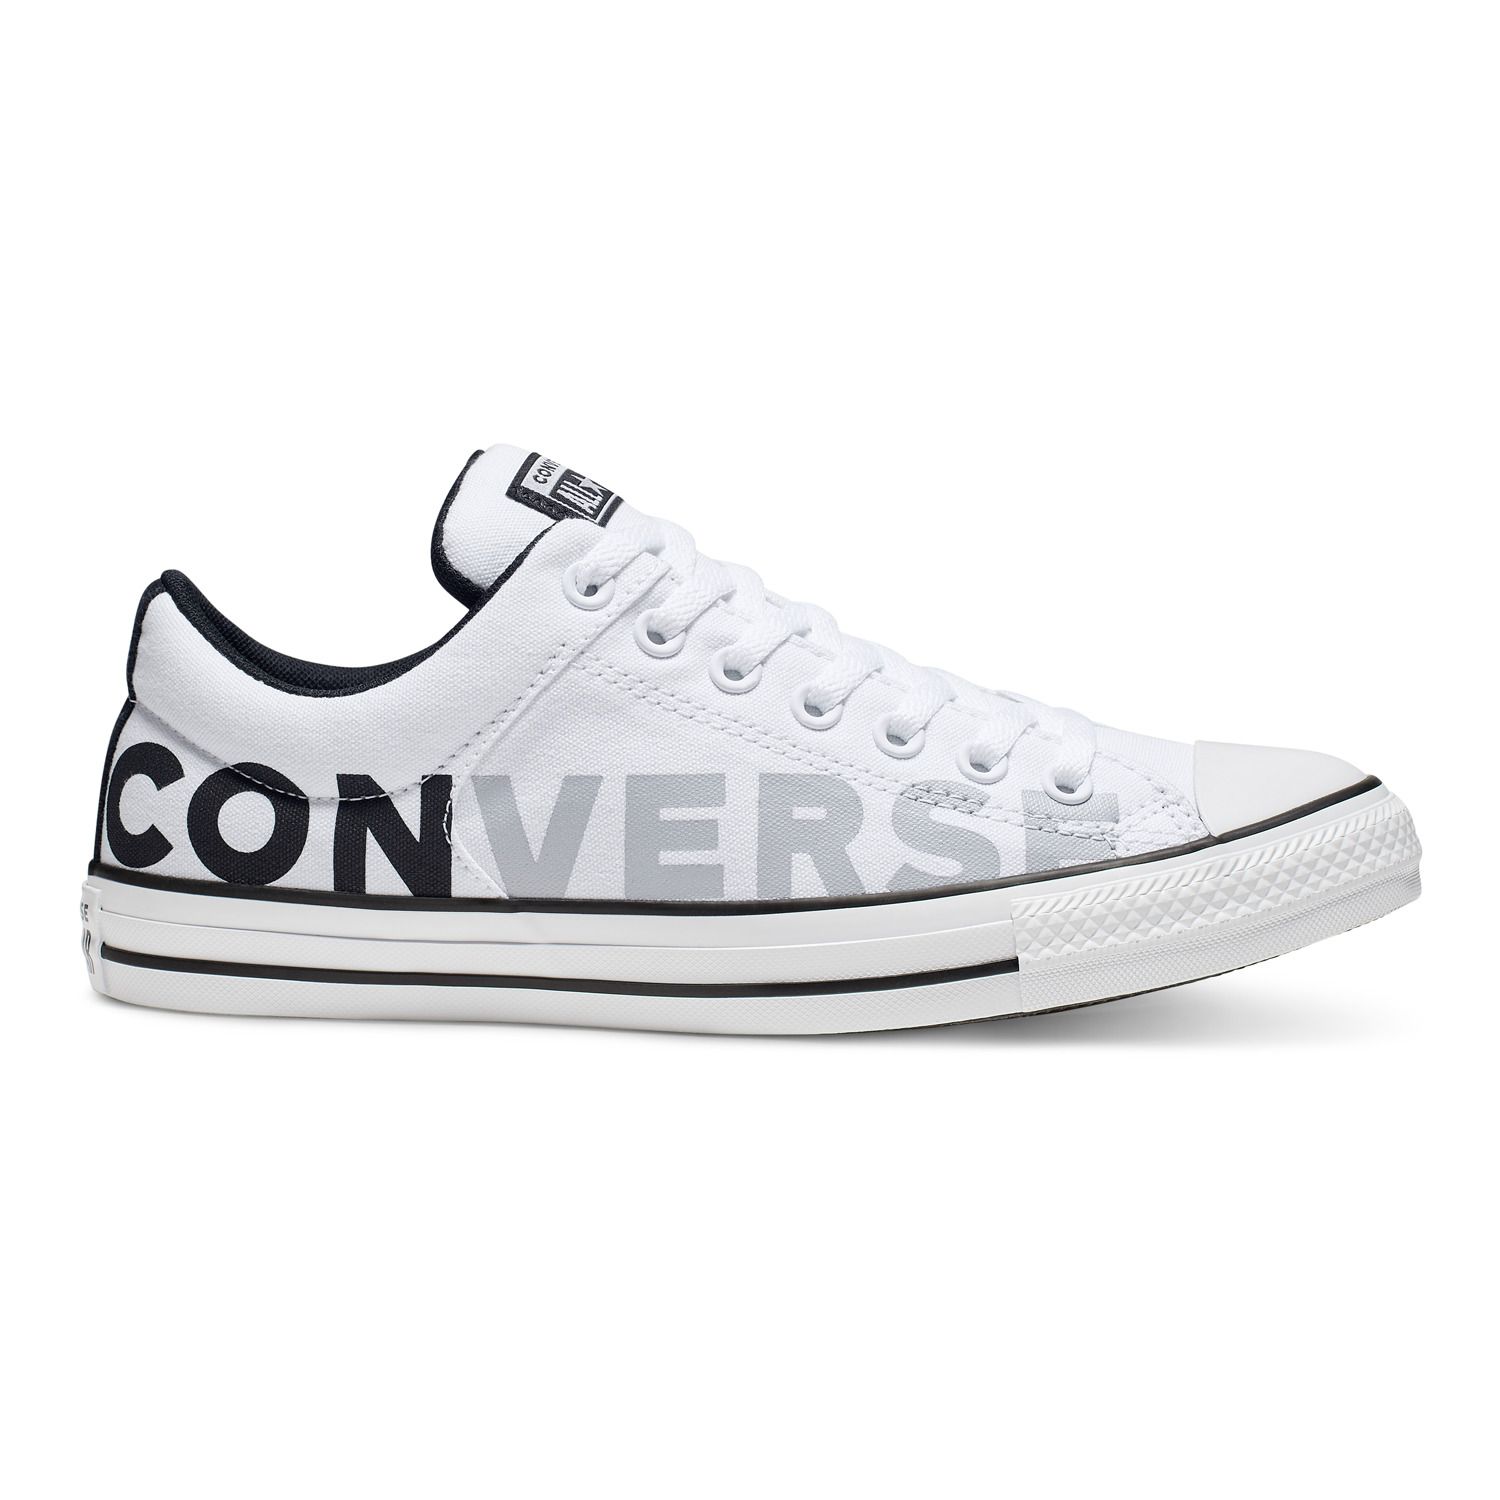 converse chuck taylor star high street wordmark - Online Discount Shop for Electronics, Apparel, Toys, Books, Games, Shoes, Jewelry, Watches, Baby Products, Sports & Outdoors, Office Products, Bed & Bath,